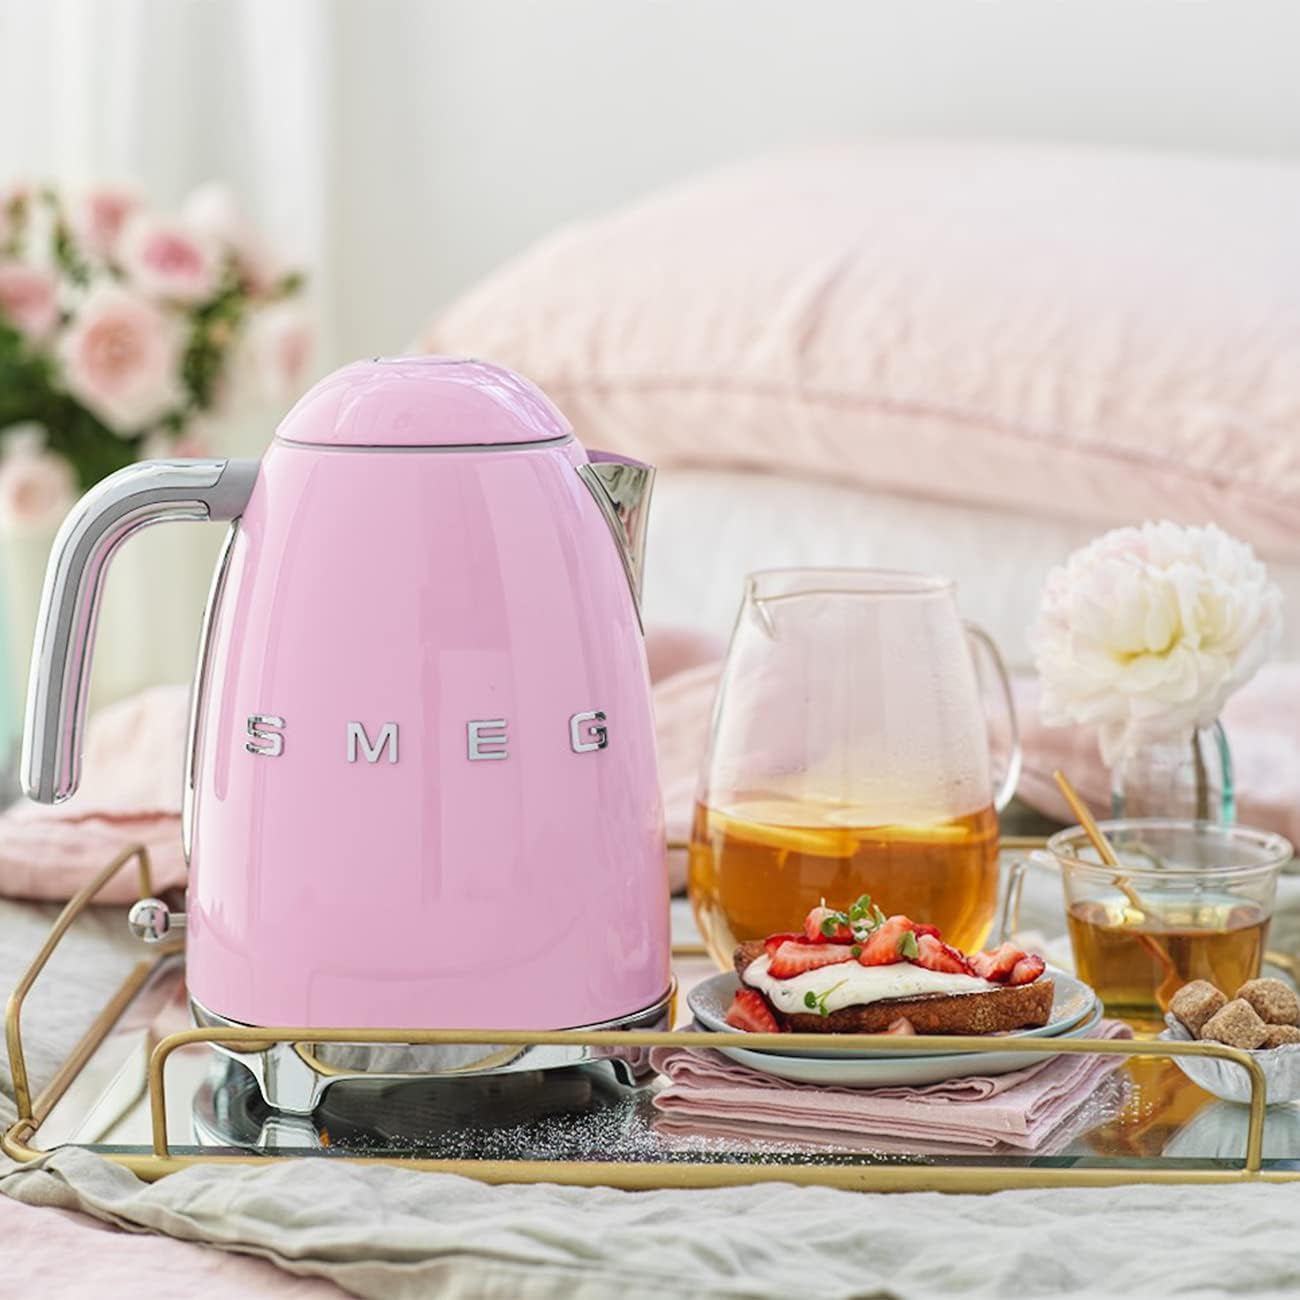 7 CUP Kettle (Pink)